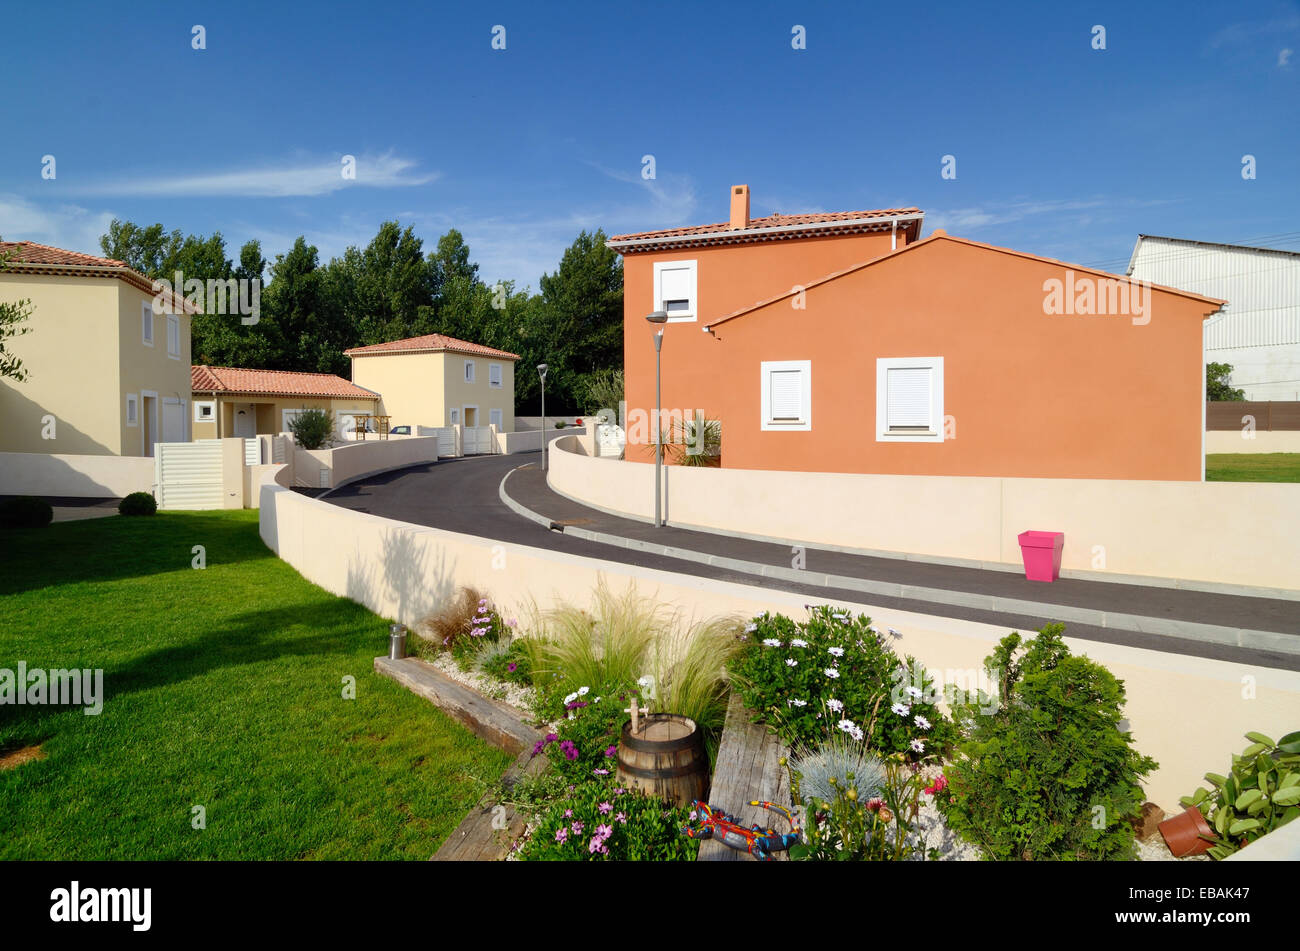 New Suburban Housing Estate or New Houses at Les Pennes-Mirabeau Bouches-du-Rhône Provence France Stock Photo